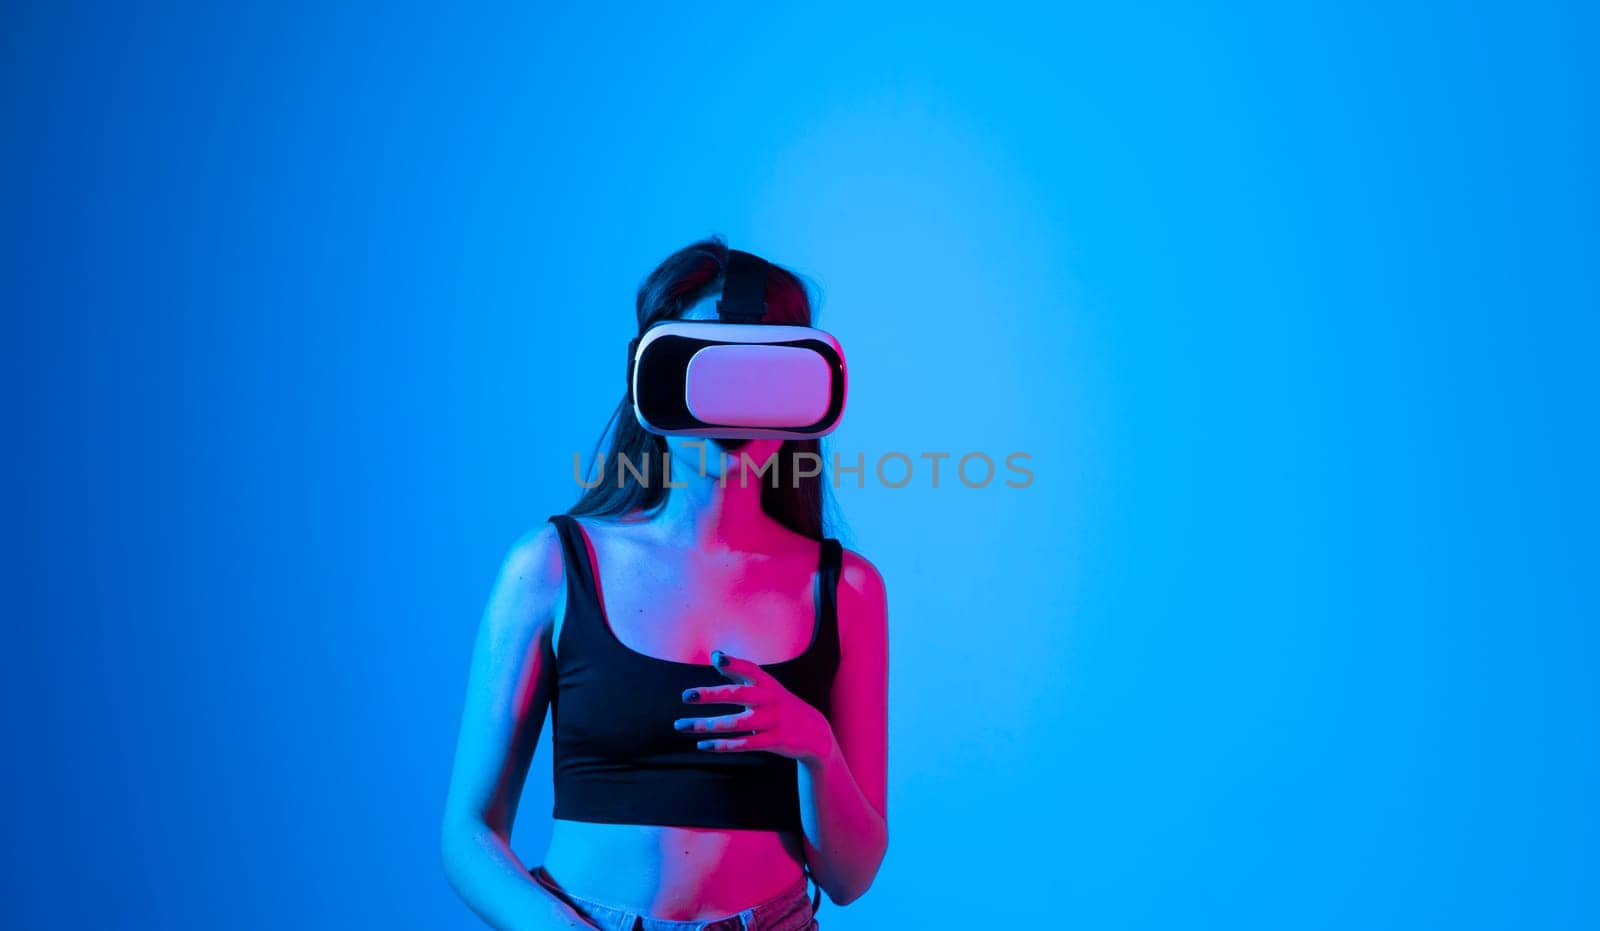 Brunette woman wearing virtual vr goggles. Young famale in a black top wearing virtual reality headset. VR concept